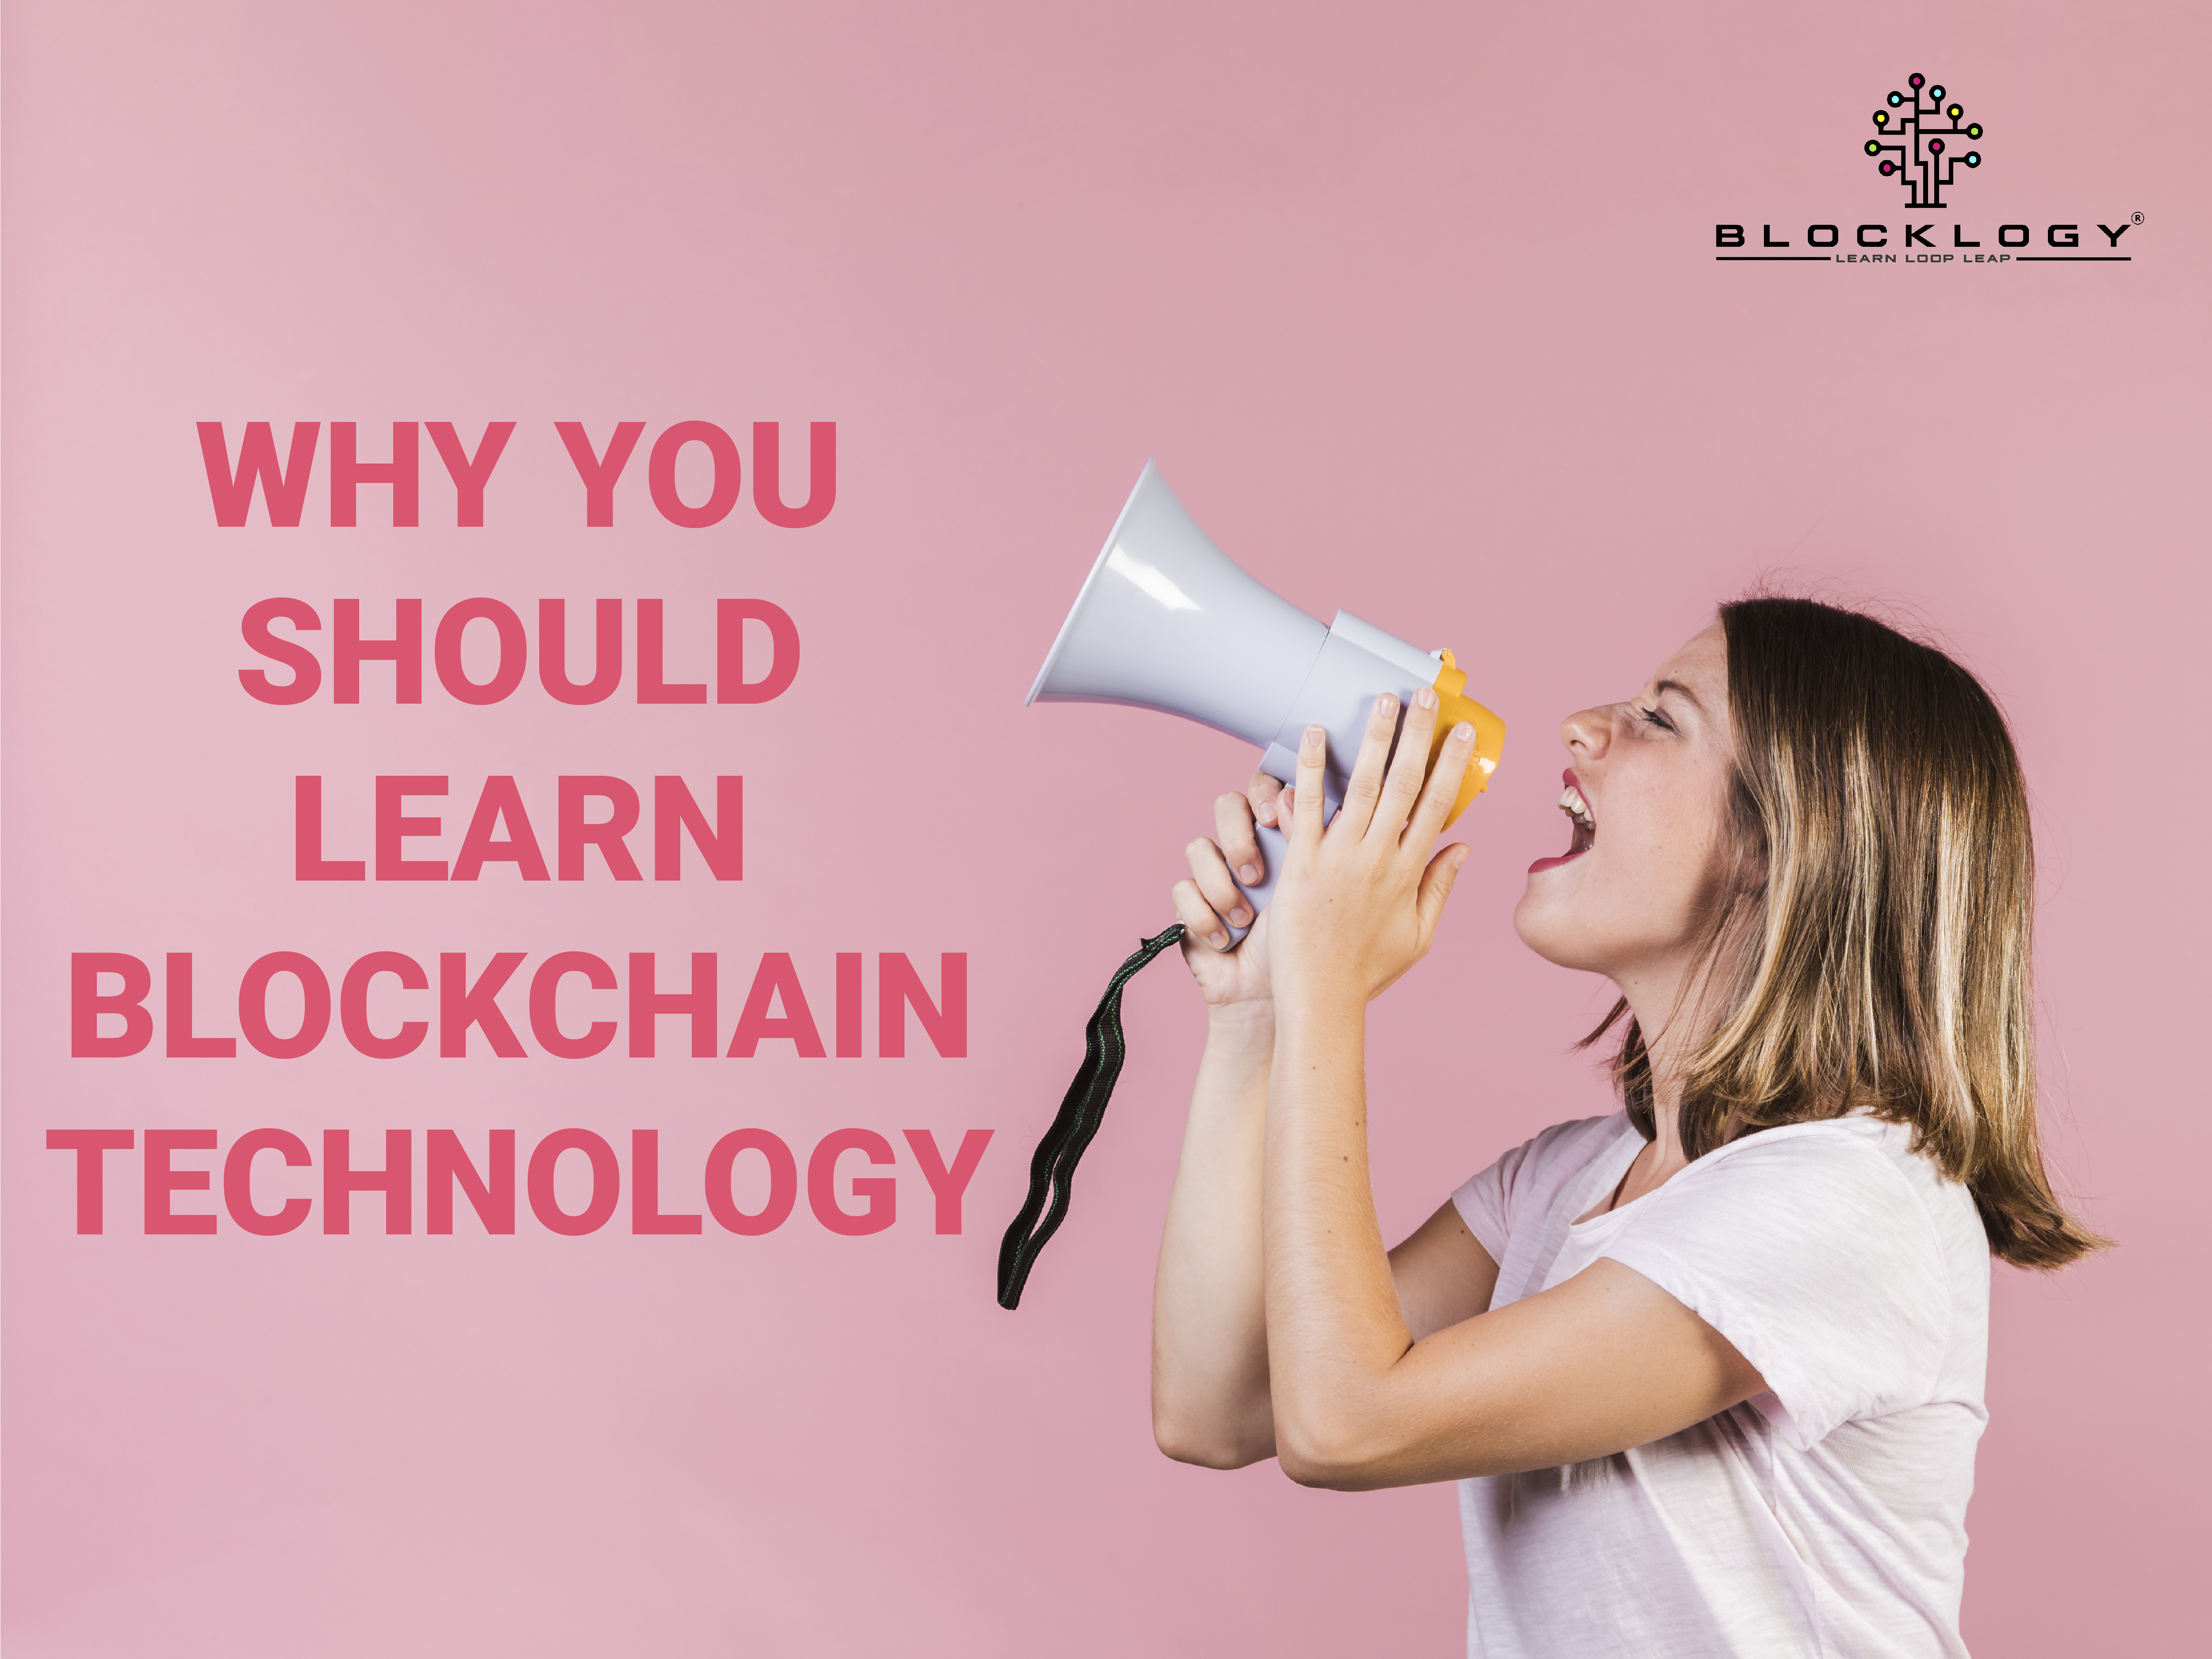 Blocklogy | WHY YOU SHOULD LEARN BLOCKCHAIN TECHNOLOGY